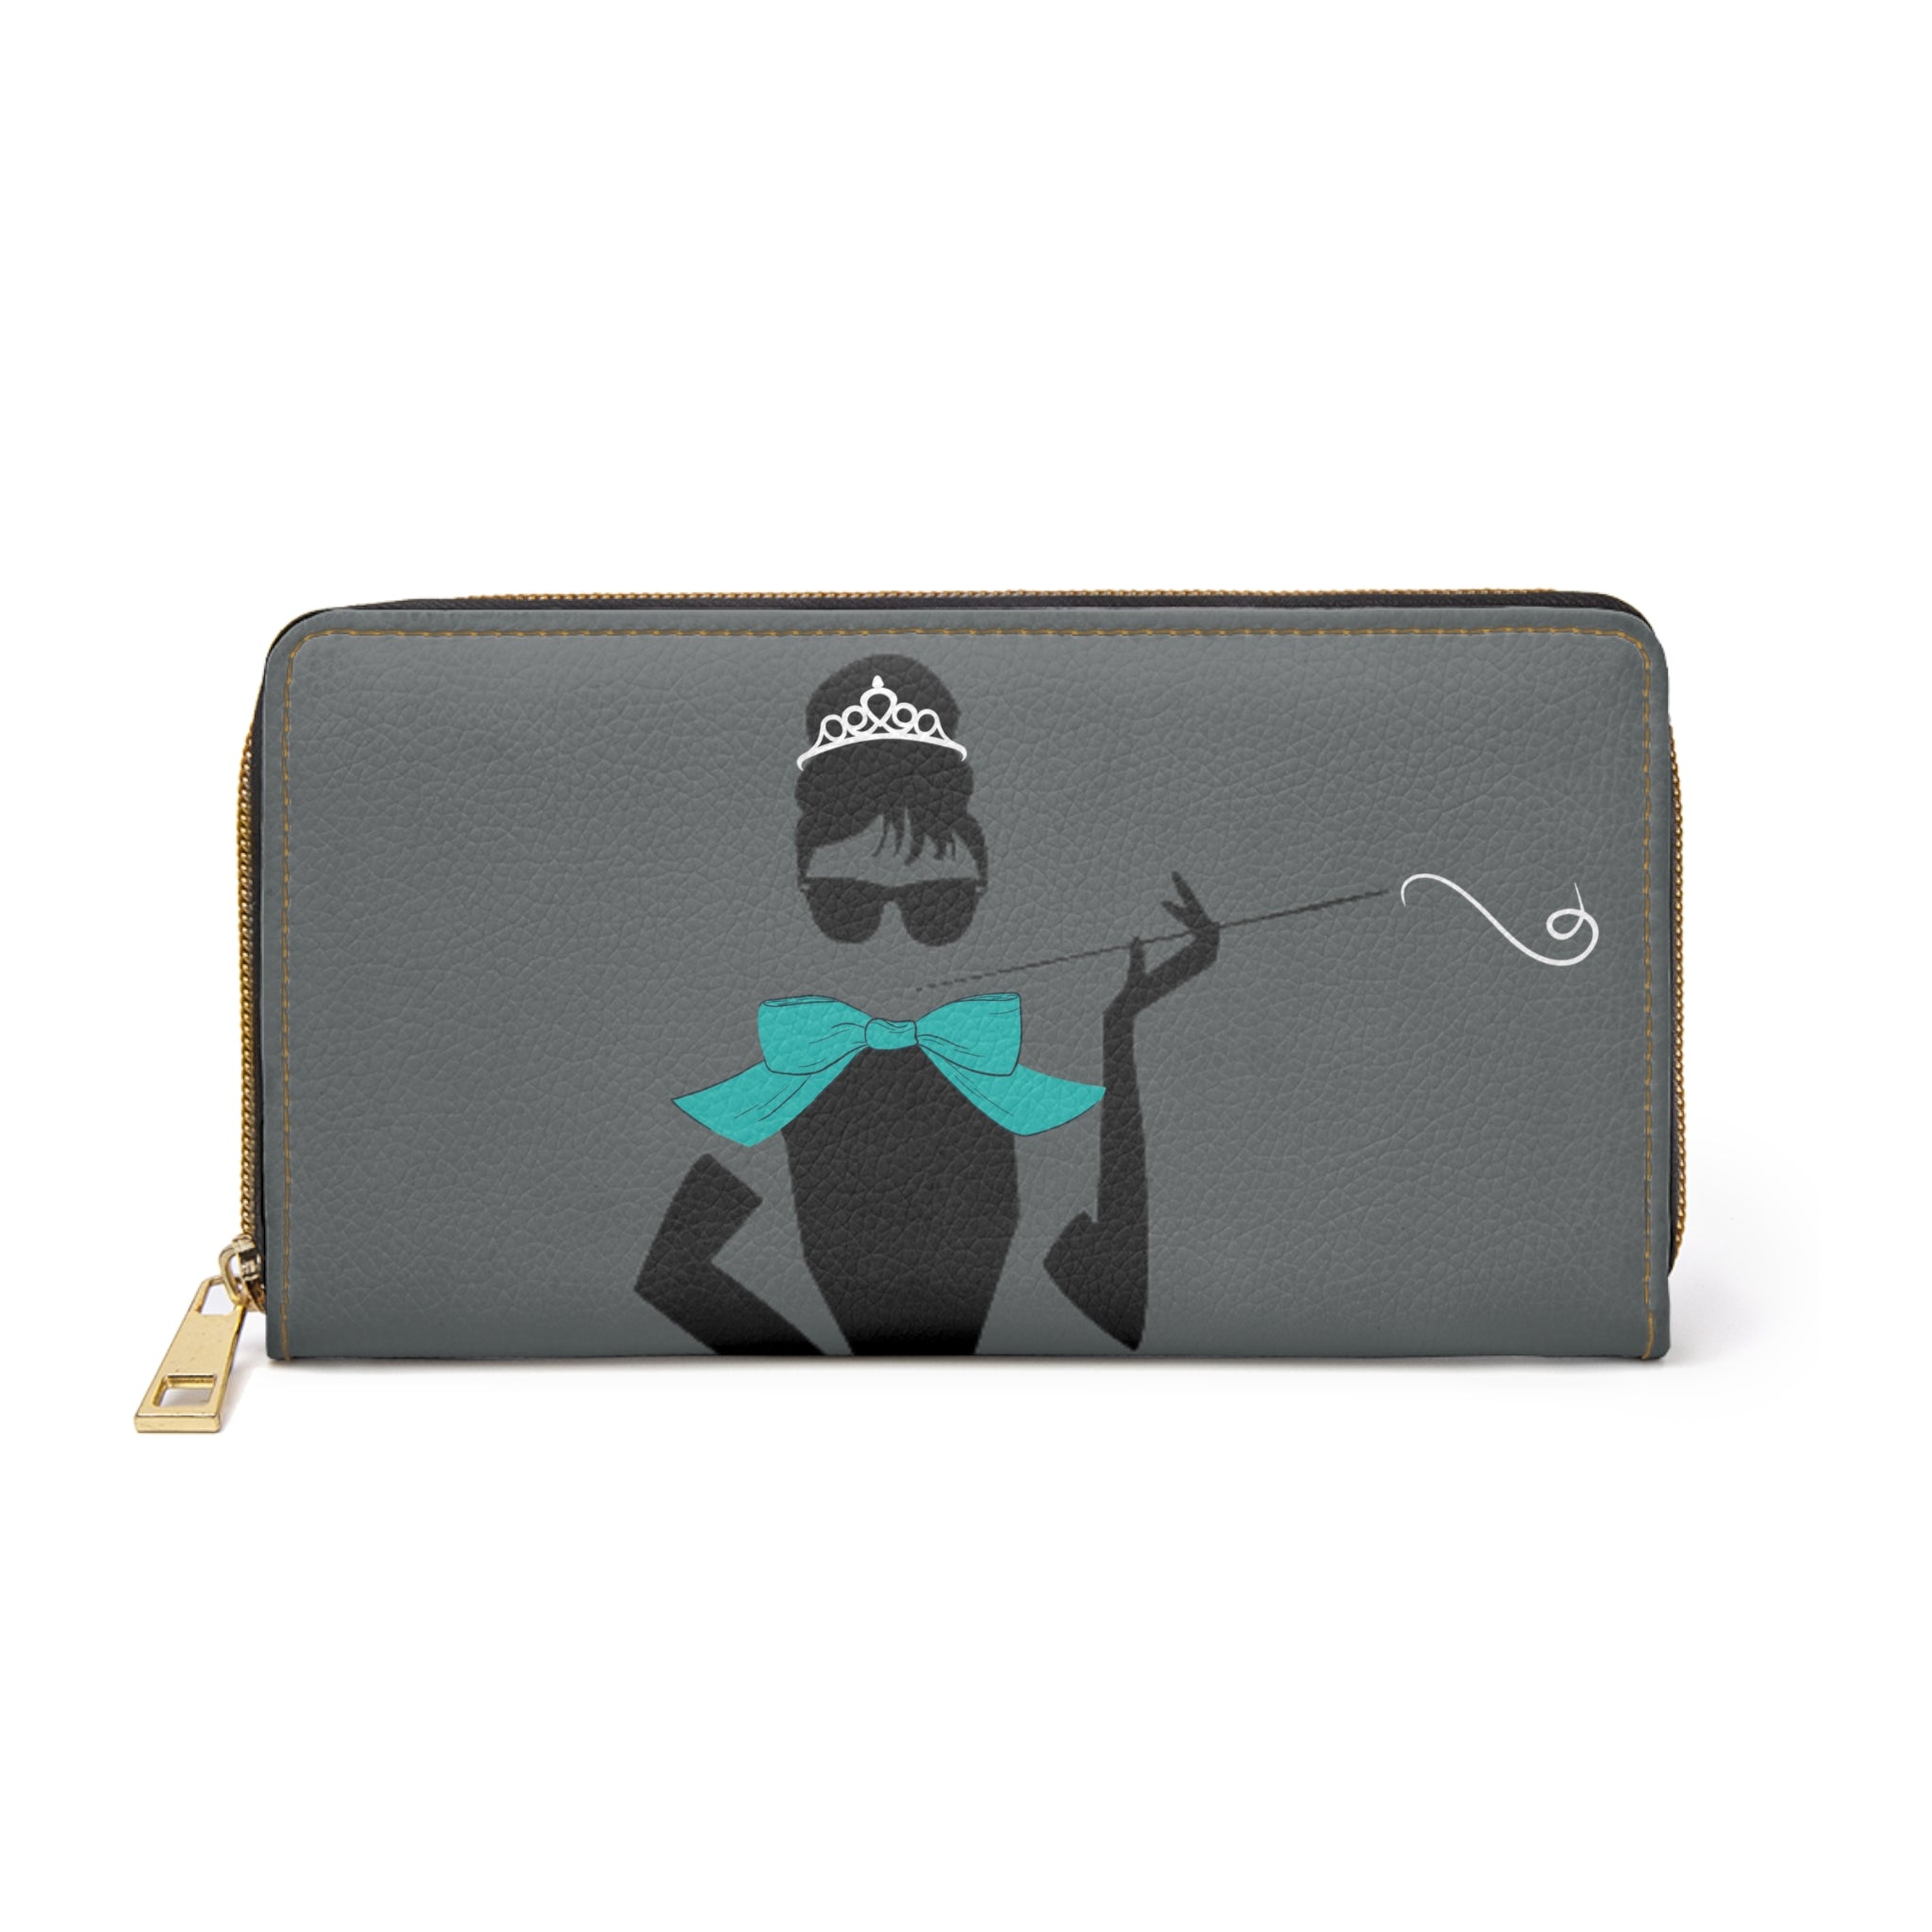 To Terrific and Co. (Silhouette + Bow) Dark Grey Designer inspired Ladies Wallet, Zipper Pouch, Coin Purse, Zippered Wallet, Cute Purse Accessories One-size-White The Middle Aged Groove